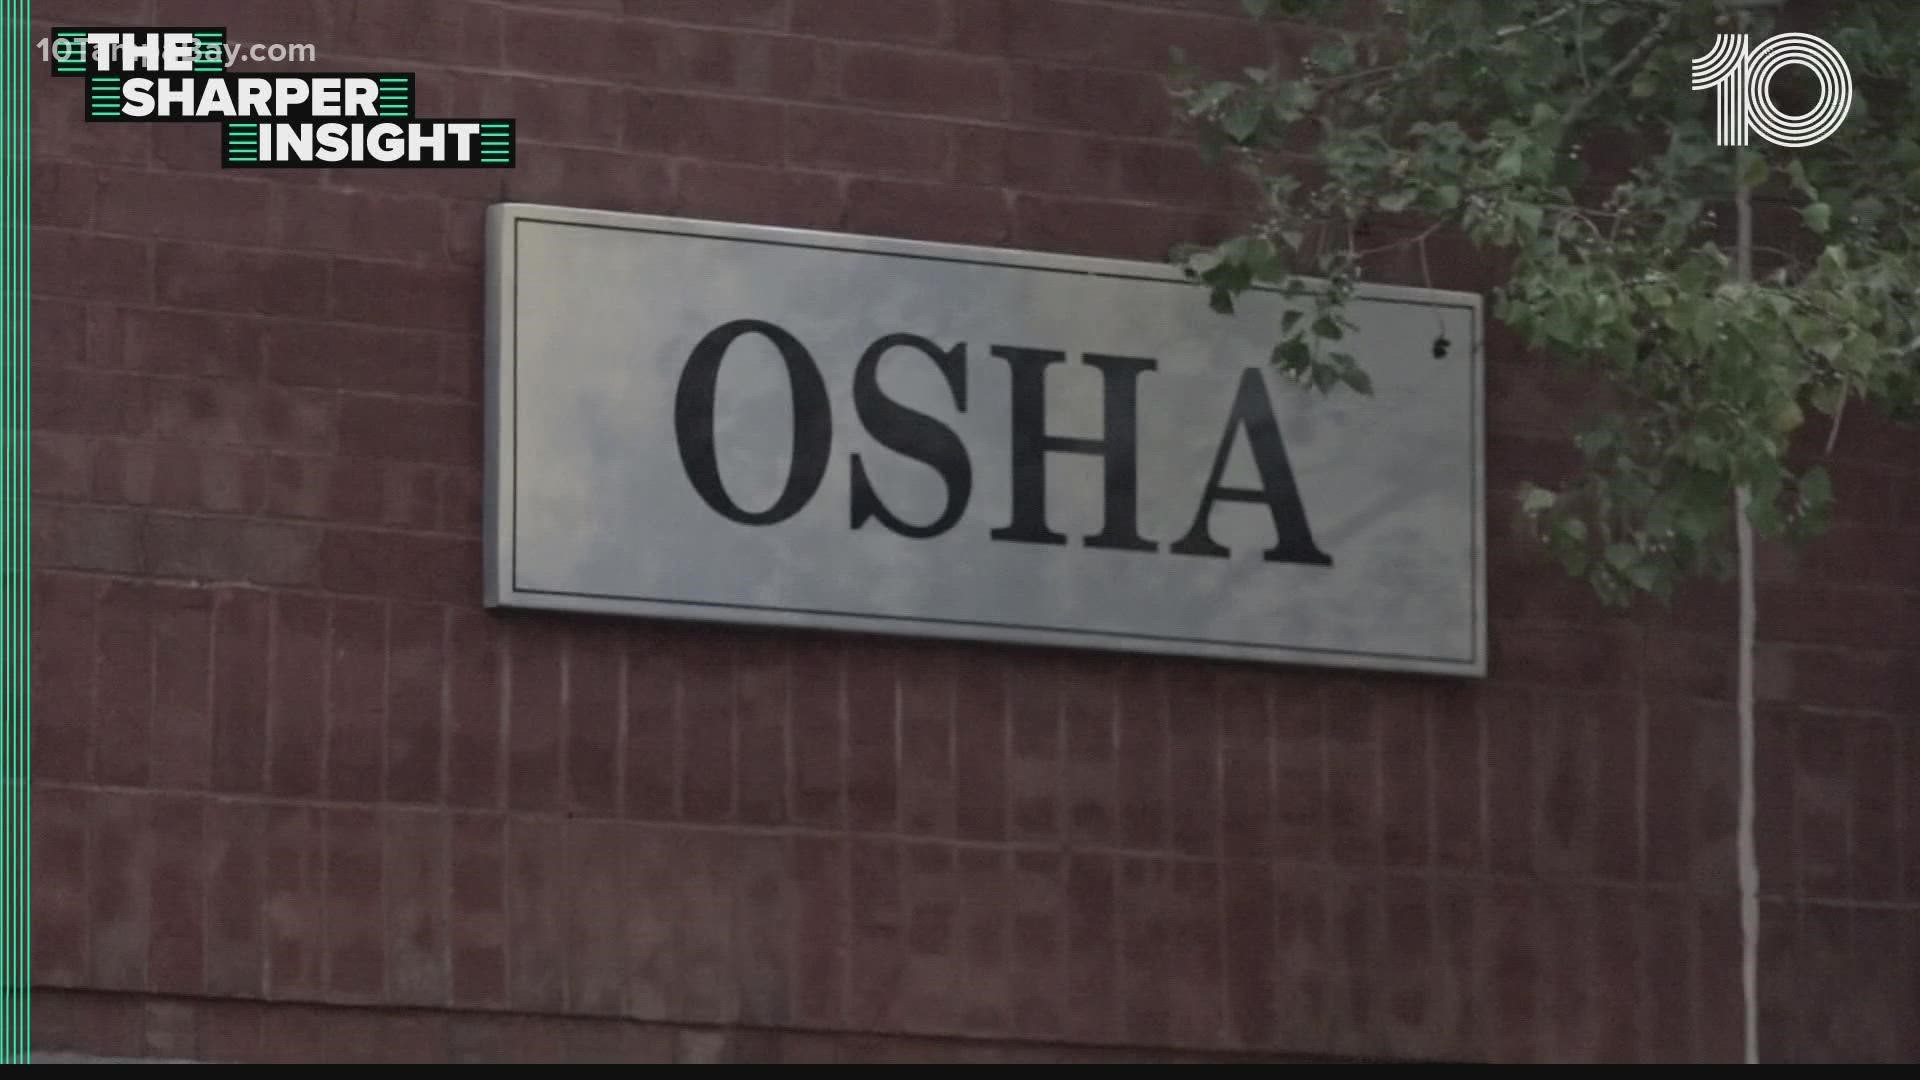 A legal expert believes Florida's version of OSHA is simply to appeal to certain voters.